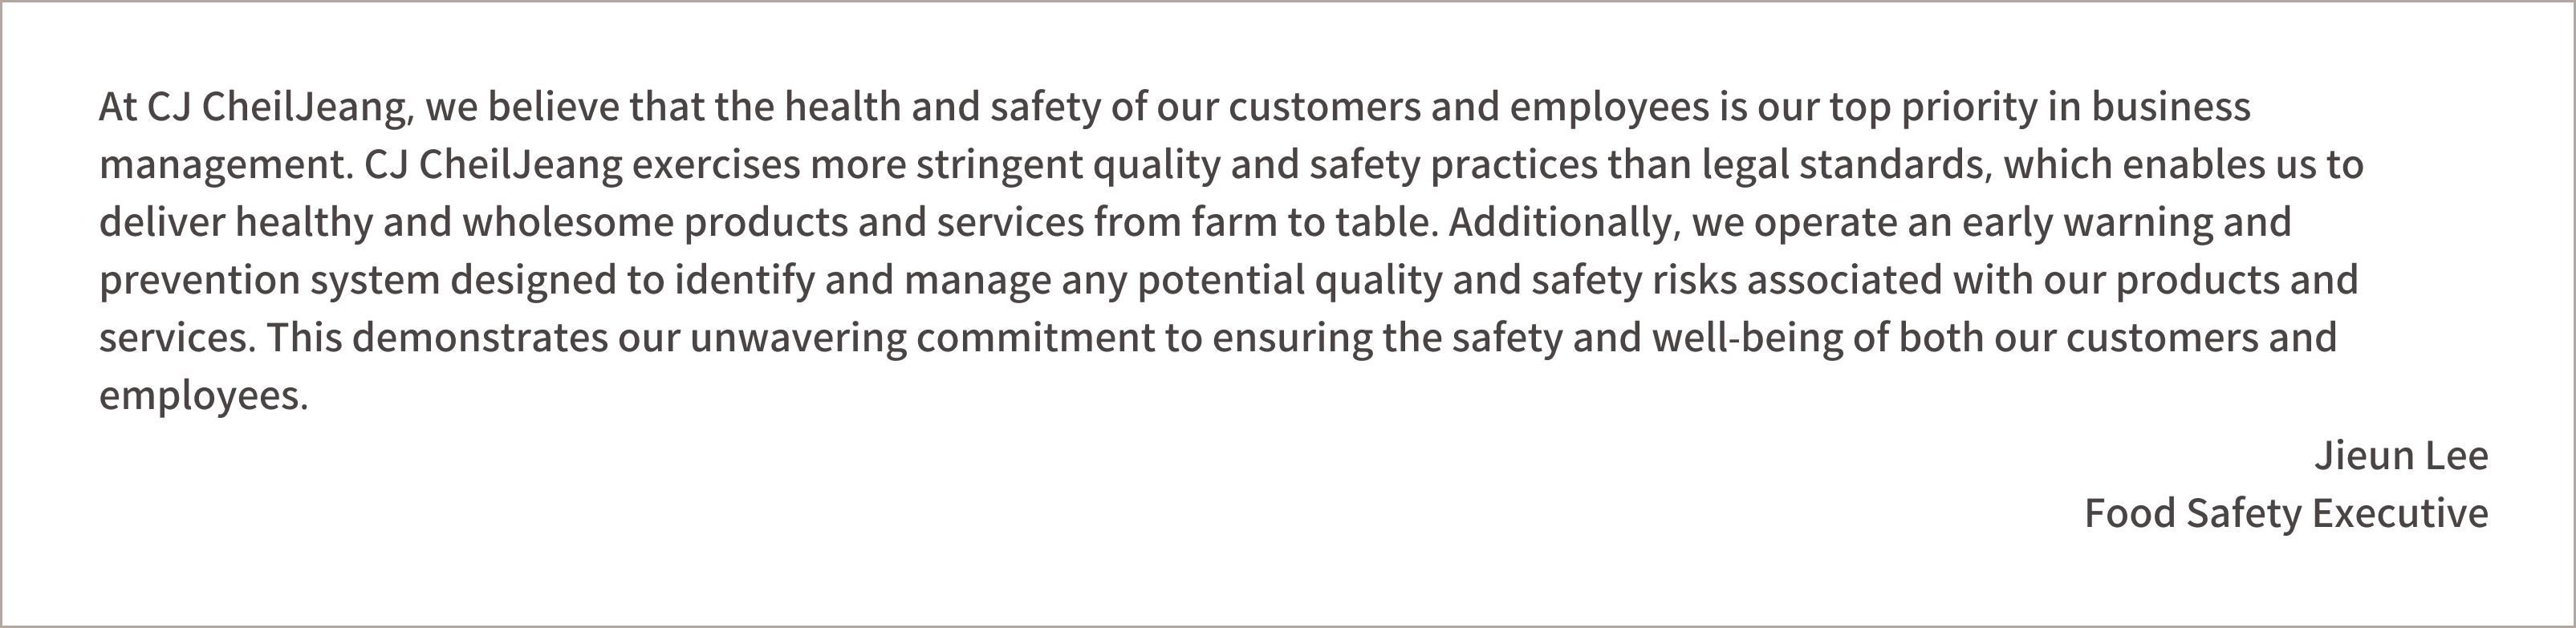 At CJ, we believe that the health and safety of our customers and employees is our top priority in business management. CJ exercises more stringent quality and safety practices than legal standards, which enables us to deliver healthy and wholesome products and services from farm to table. Additionally, we operate an early warning and prevention system designed to identify and manage any potential quality and safety risks associated with our products and services. This demonstrates our unwavering commitment to ensuring the safety and well-being of both our customers and employees.